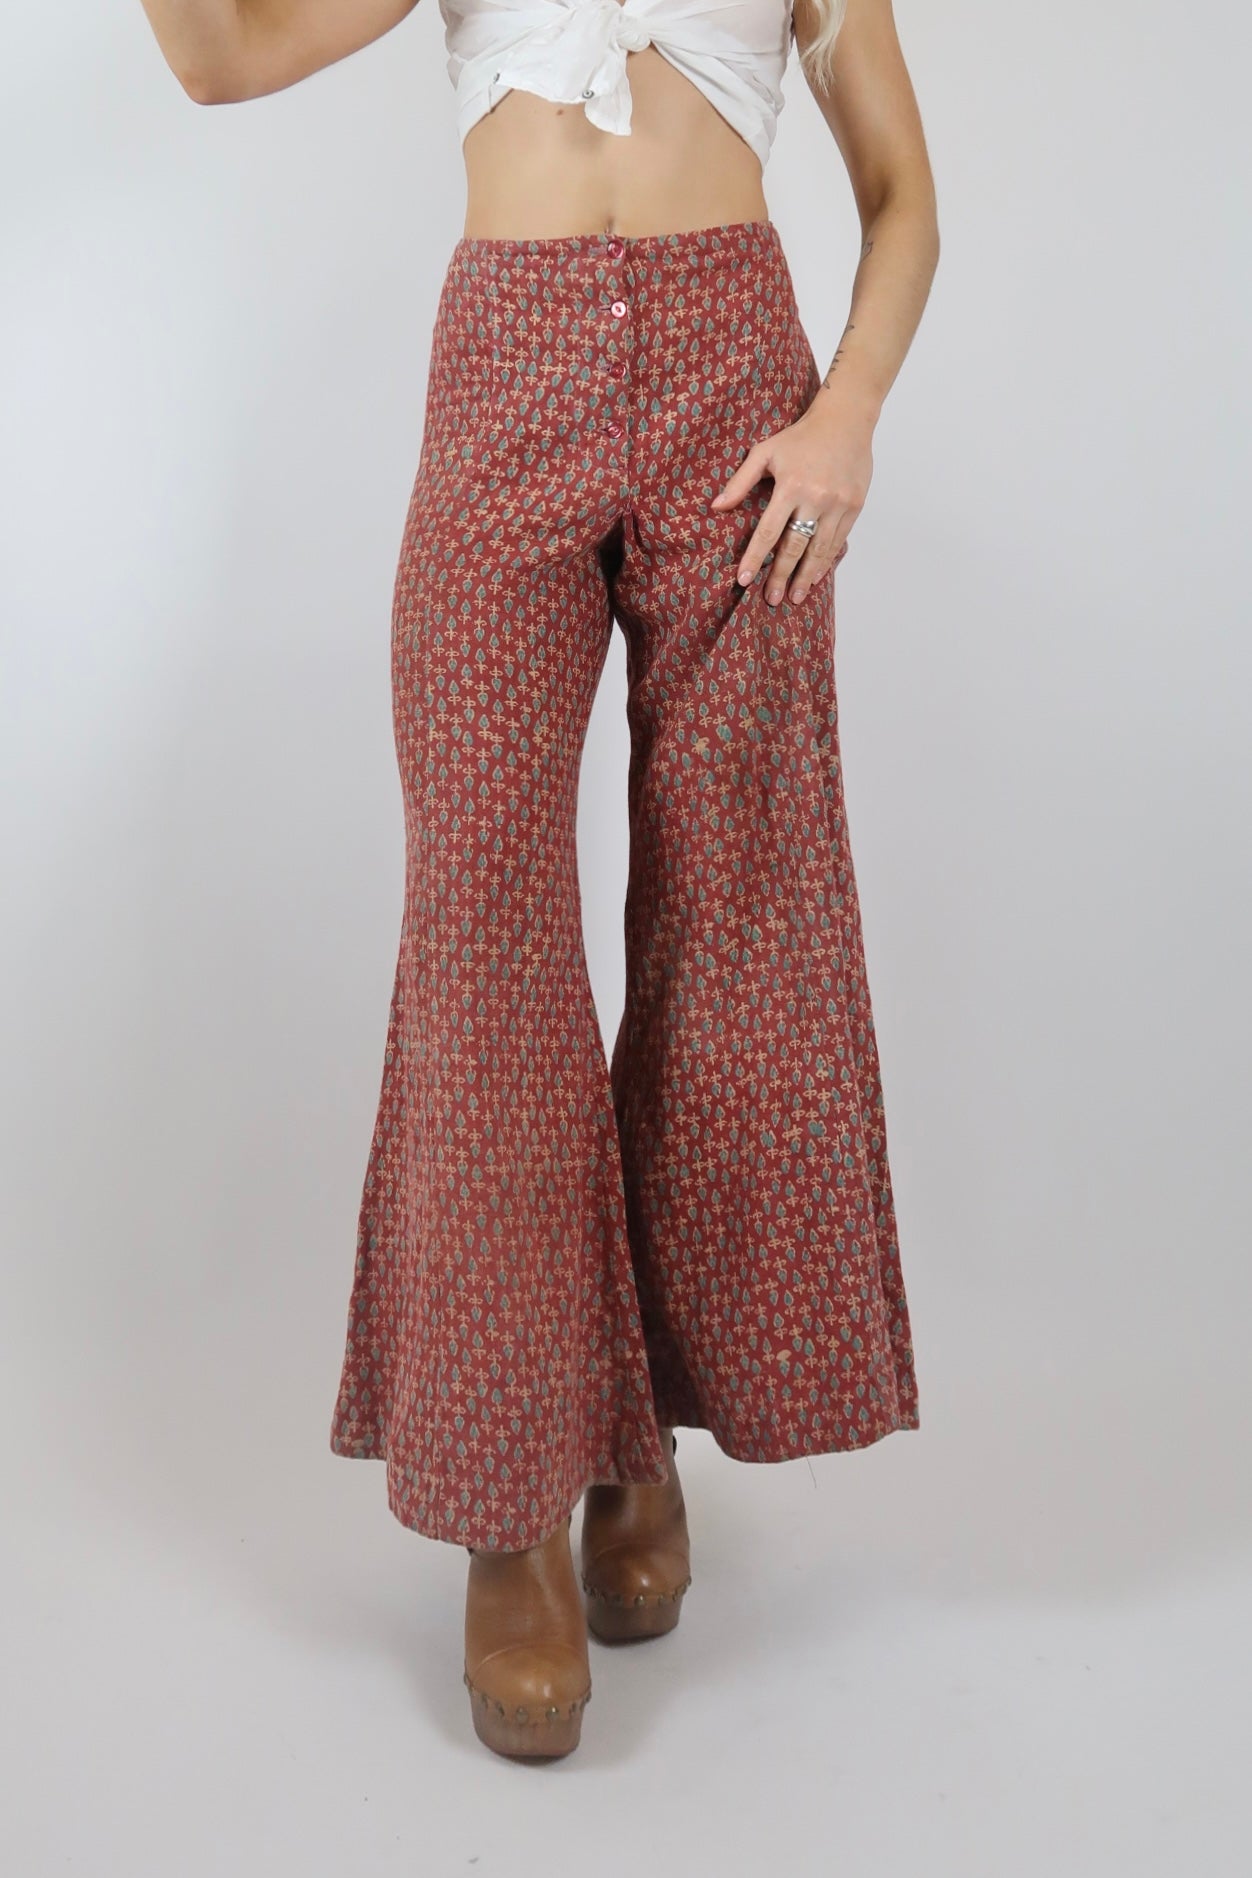 1970s Indian cotton flares